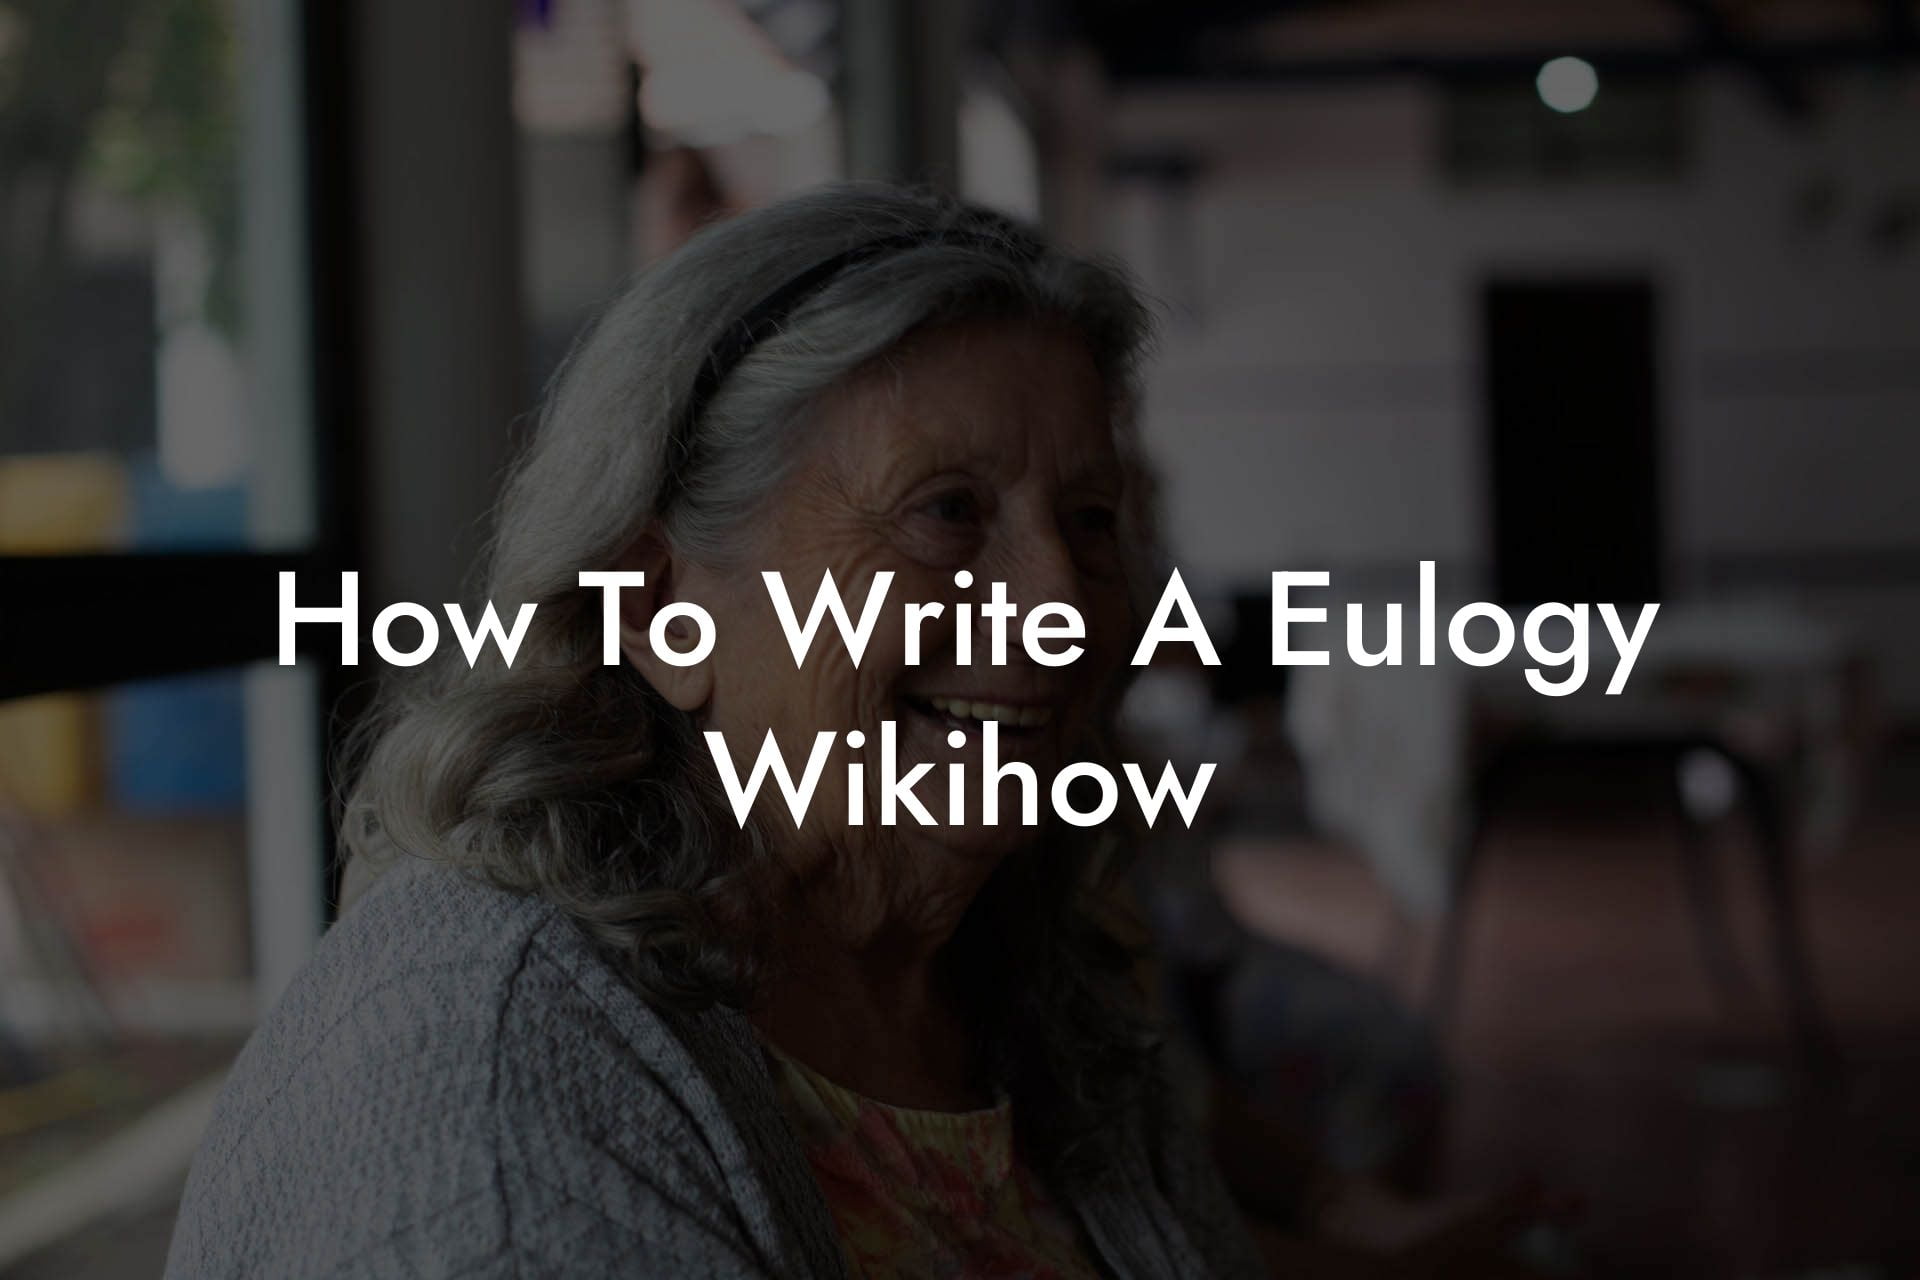 How To Write A Eulogy Wikihow